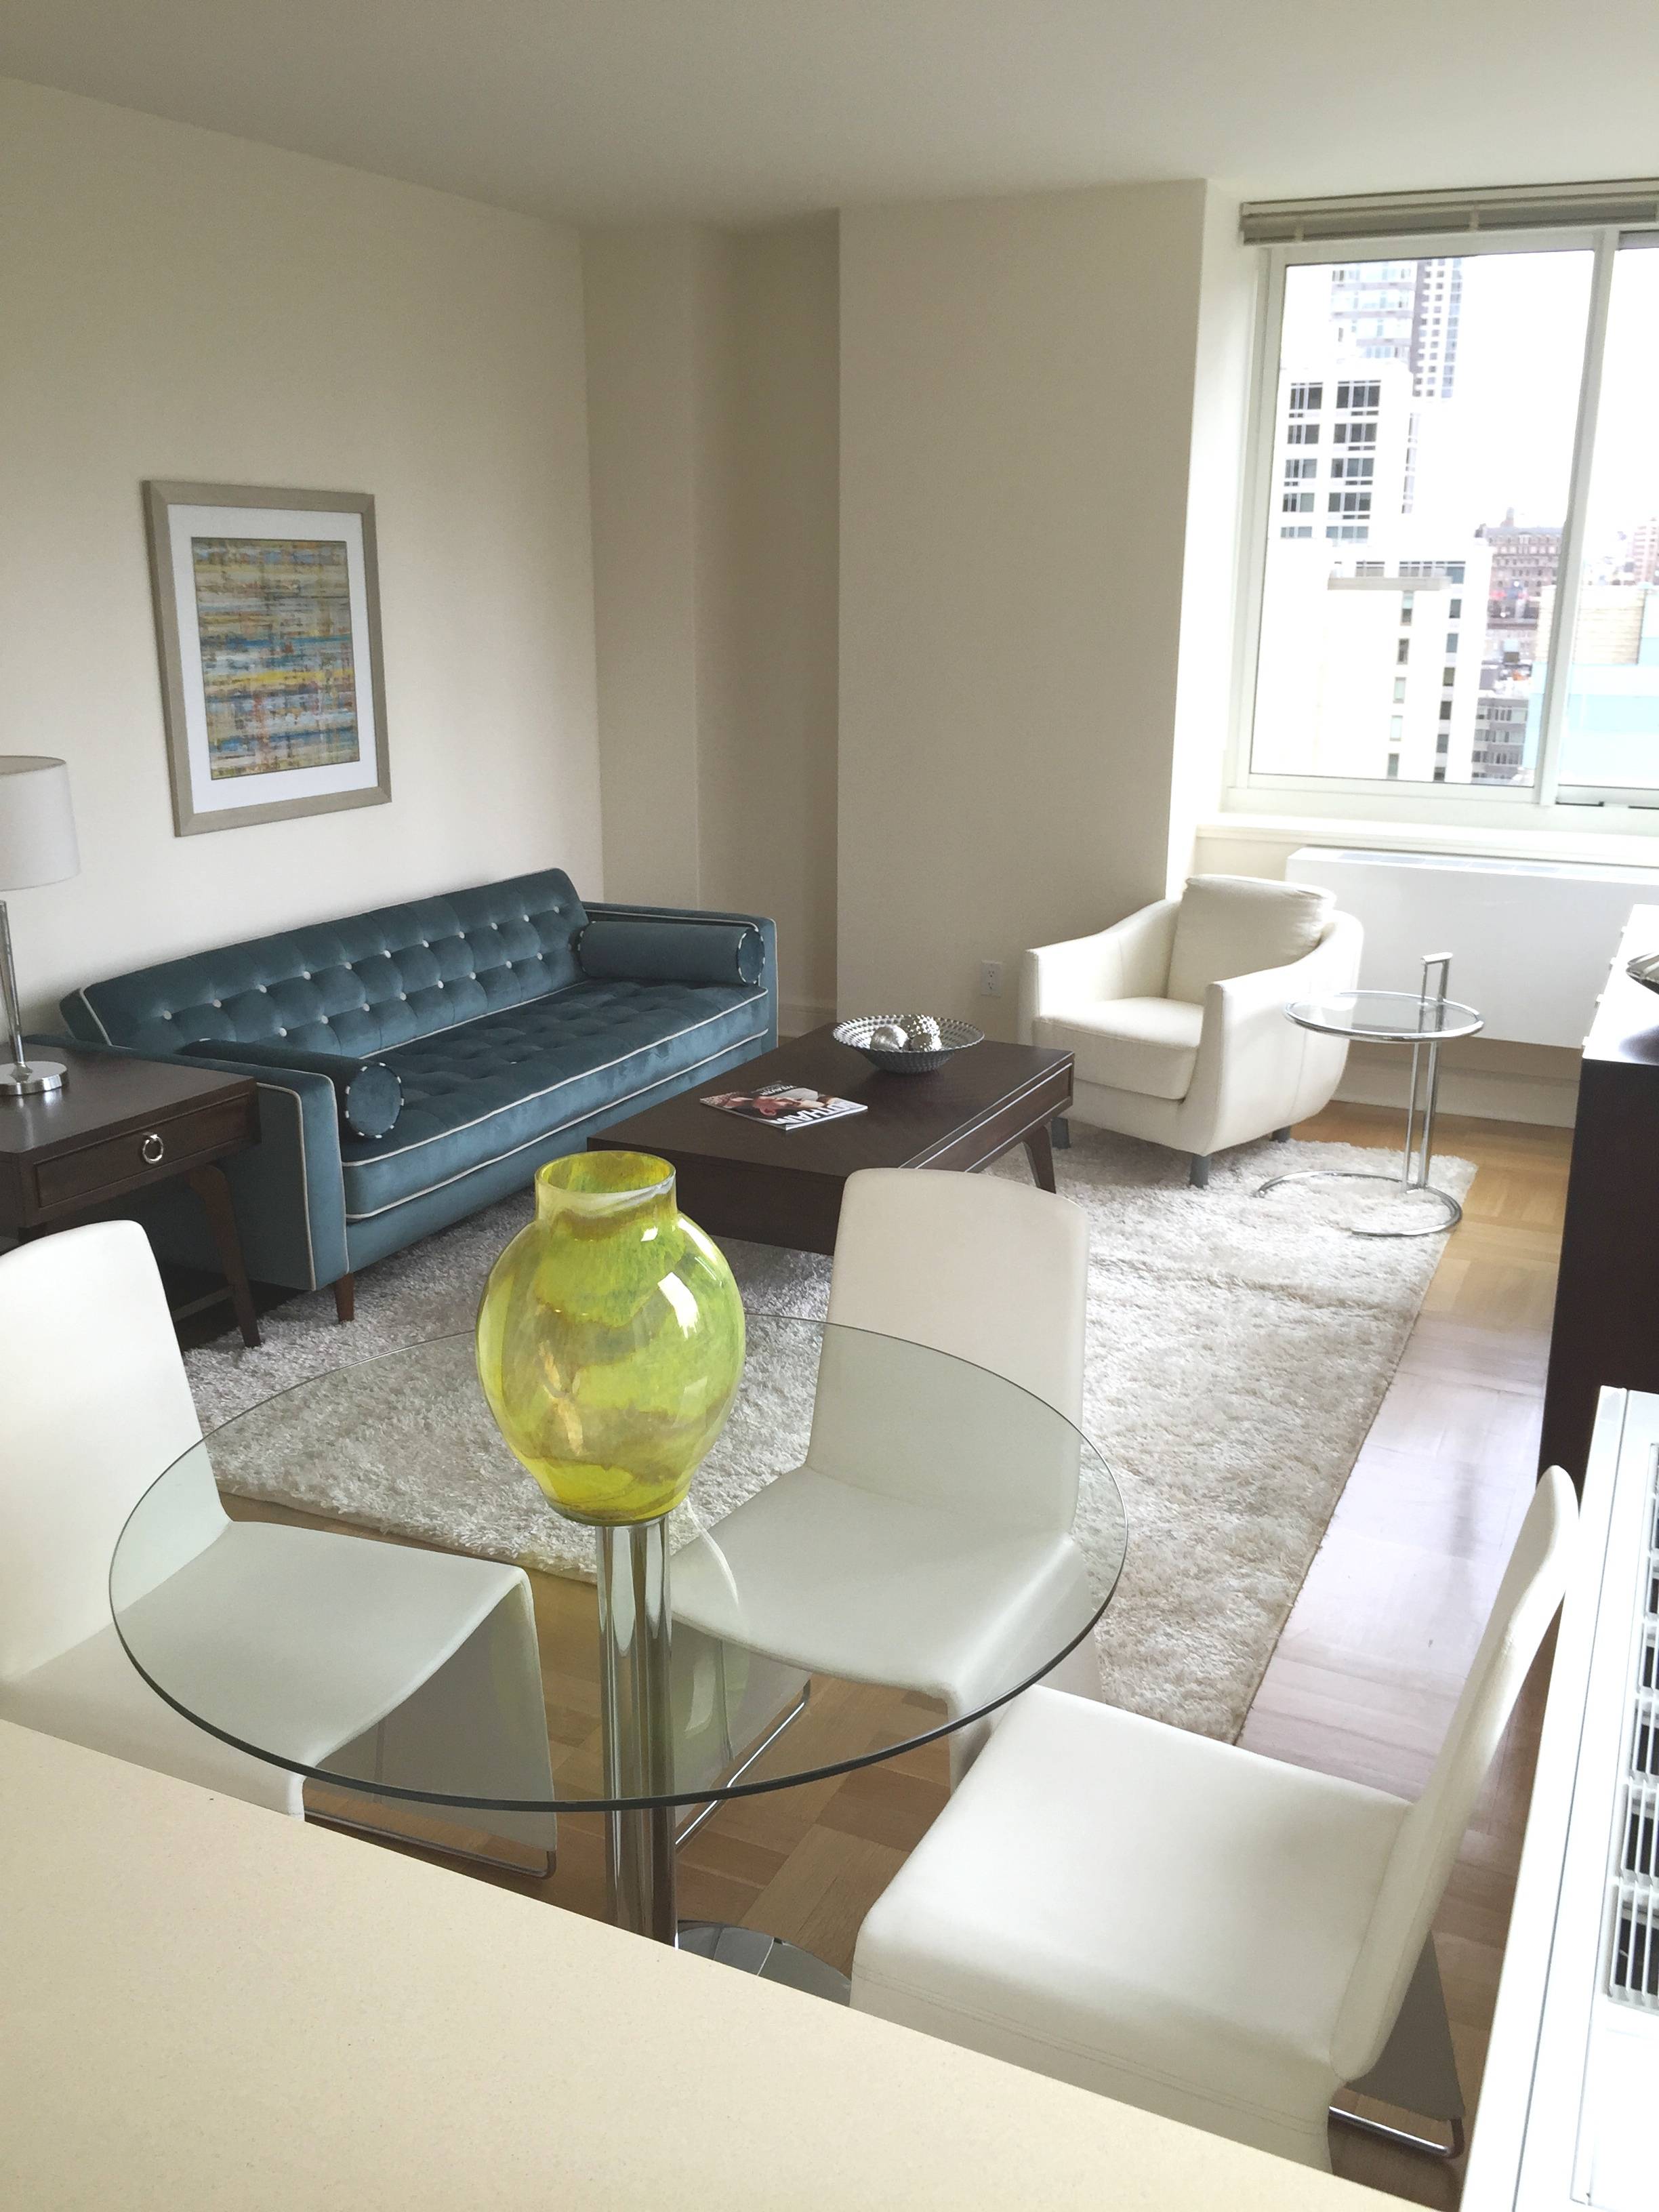 Upper West Side Two Bedroom Apartment for Rent - No Fee Luxury Building - Pool - Waterviews!